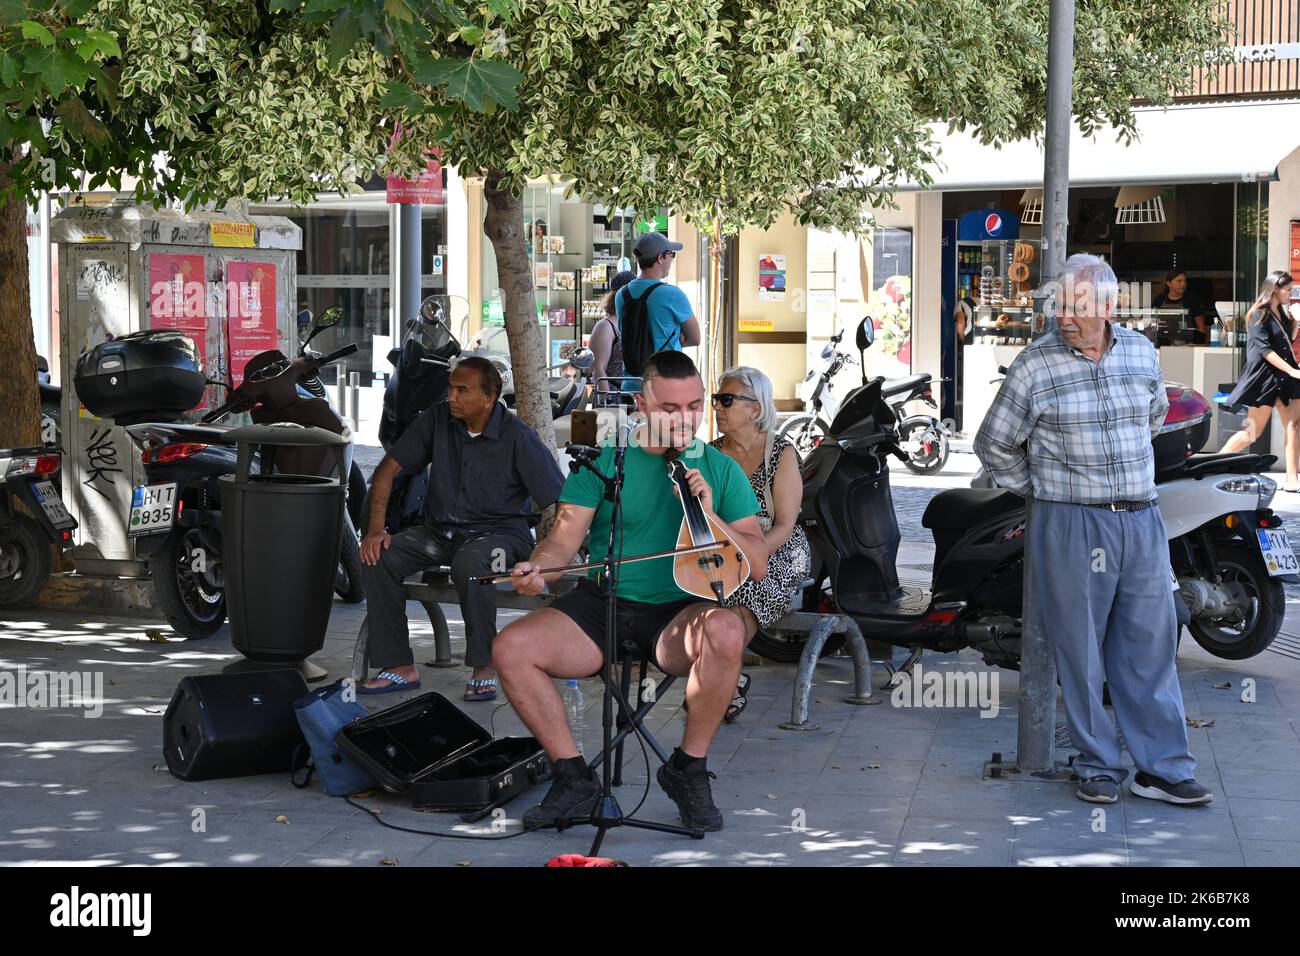 Street musician singing and playing Cretan lyra, traditional Greek music instrument in centrum of town surrounded by people. Stock Photo